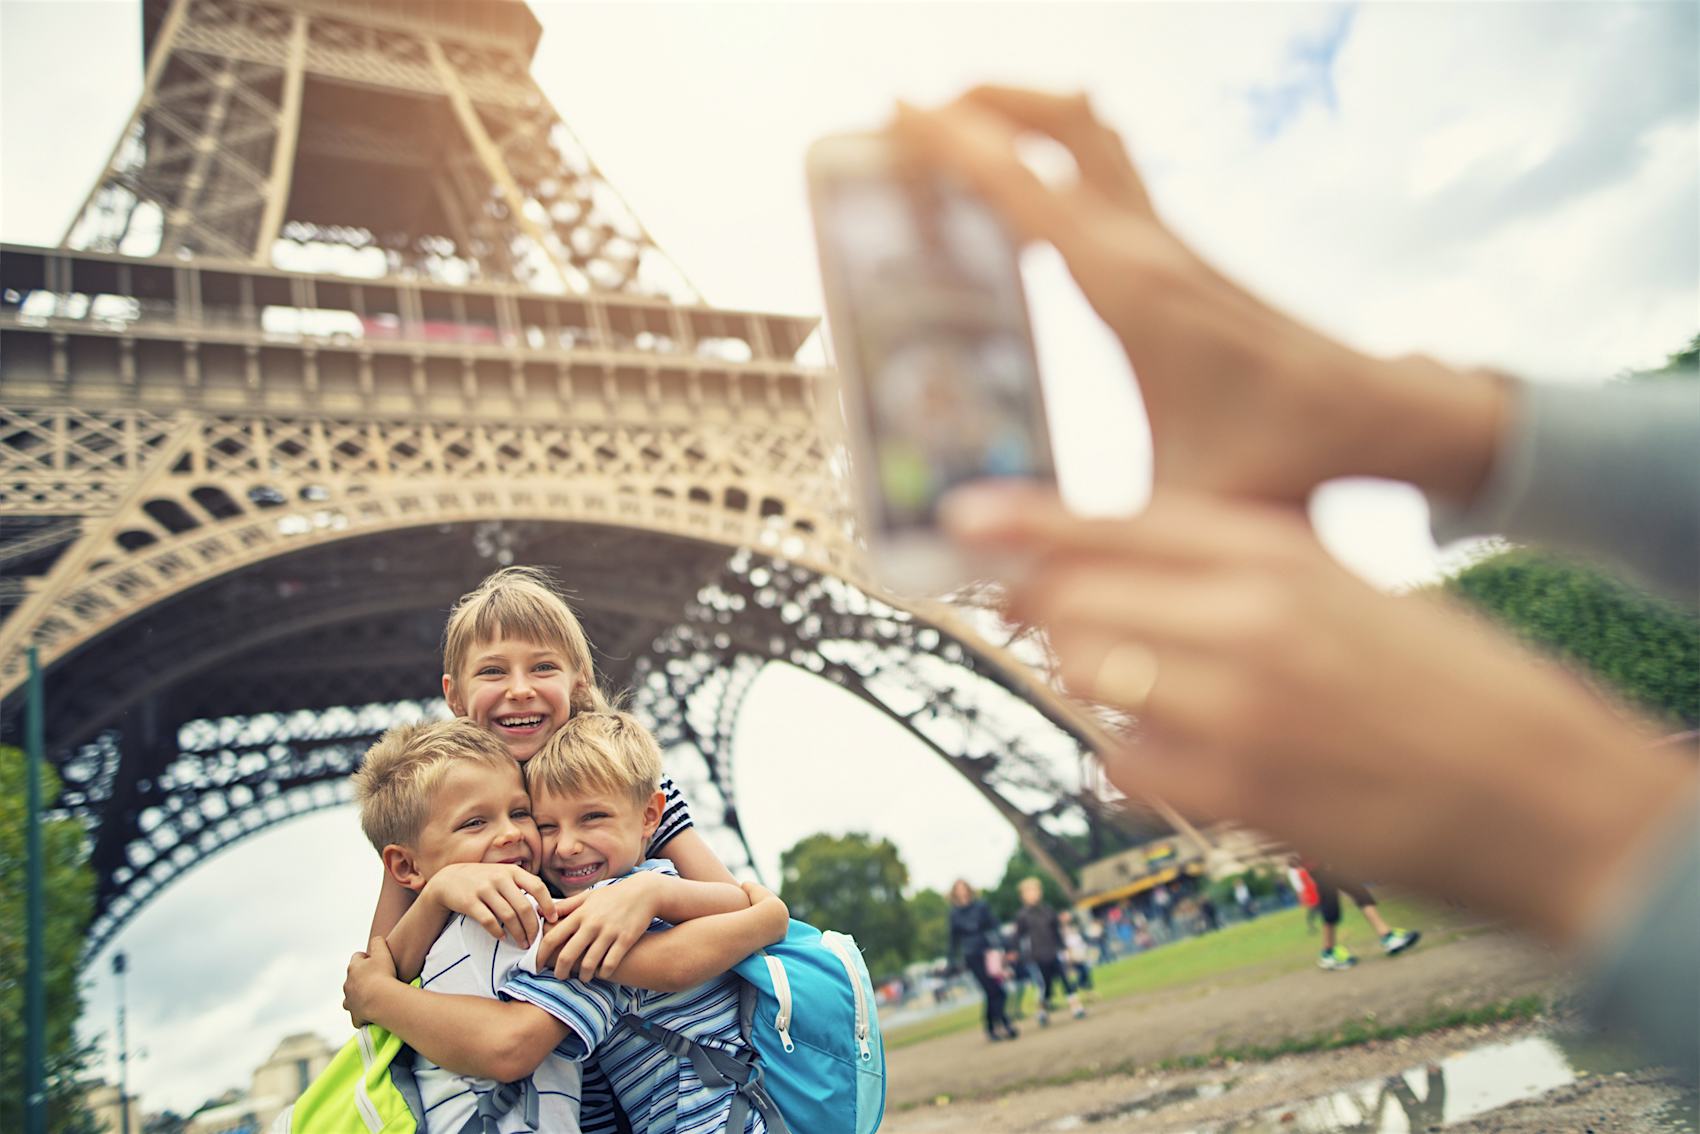 Health passes are required to access most cultural, entertainment and leisure venues across France